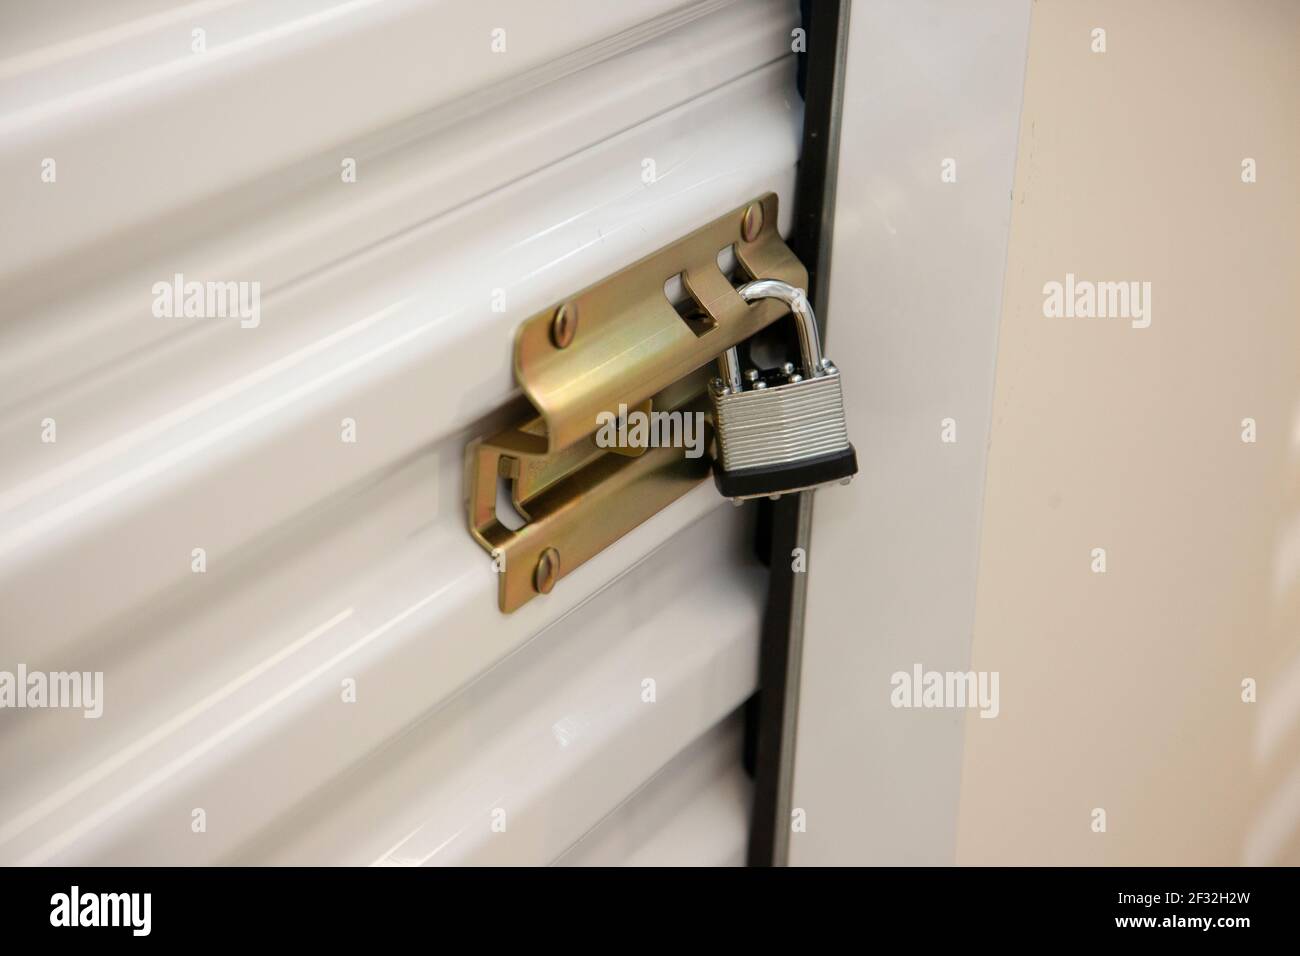 Metal door to an individual storage compartment held shut and locked with a metal padlock Stock Photo